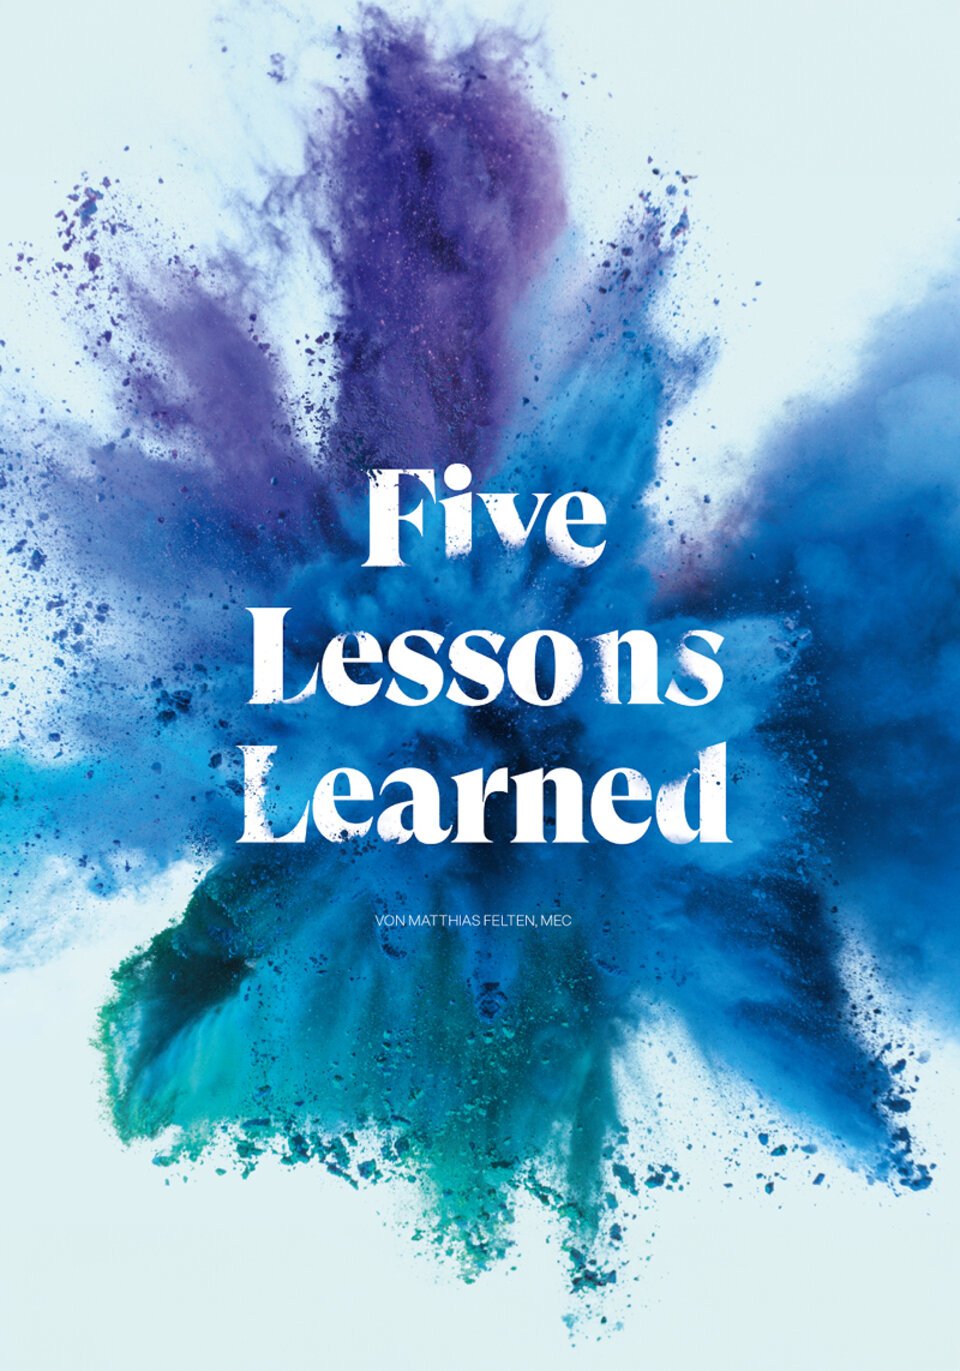 FMZ Report 23 Lessons Learned